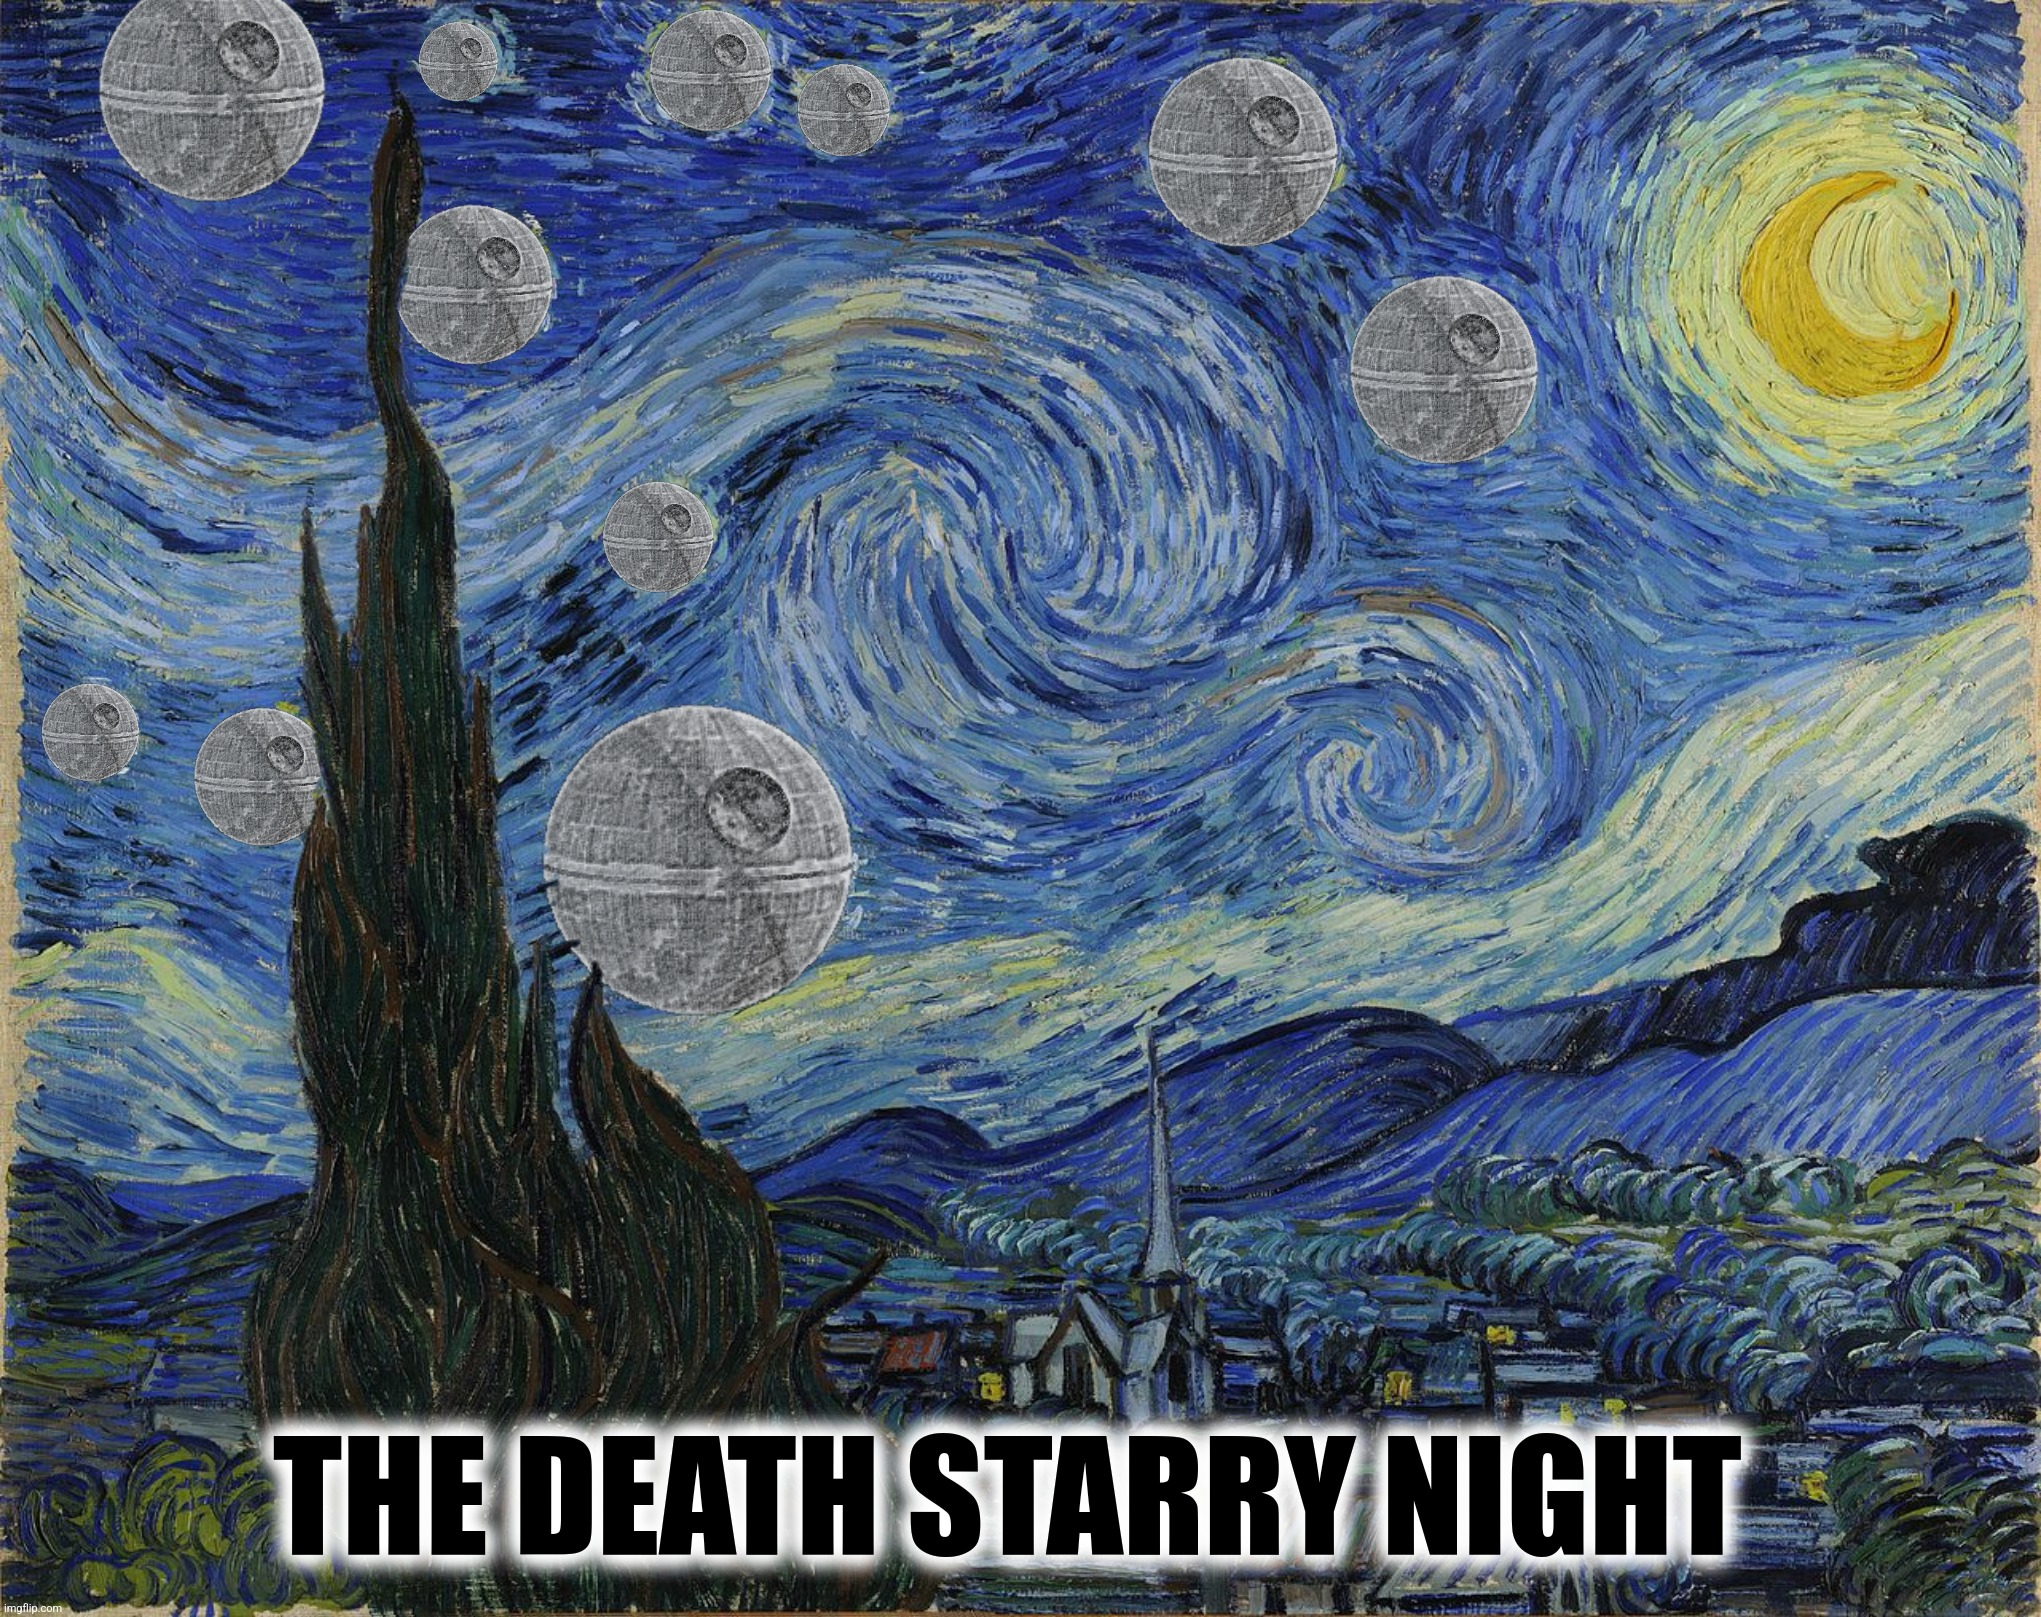 THE DEATH STARRY NIGHT | made w/ Imgflip meme maker